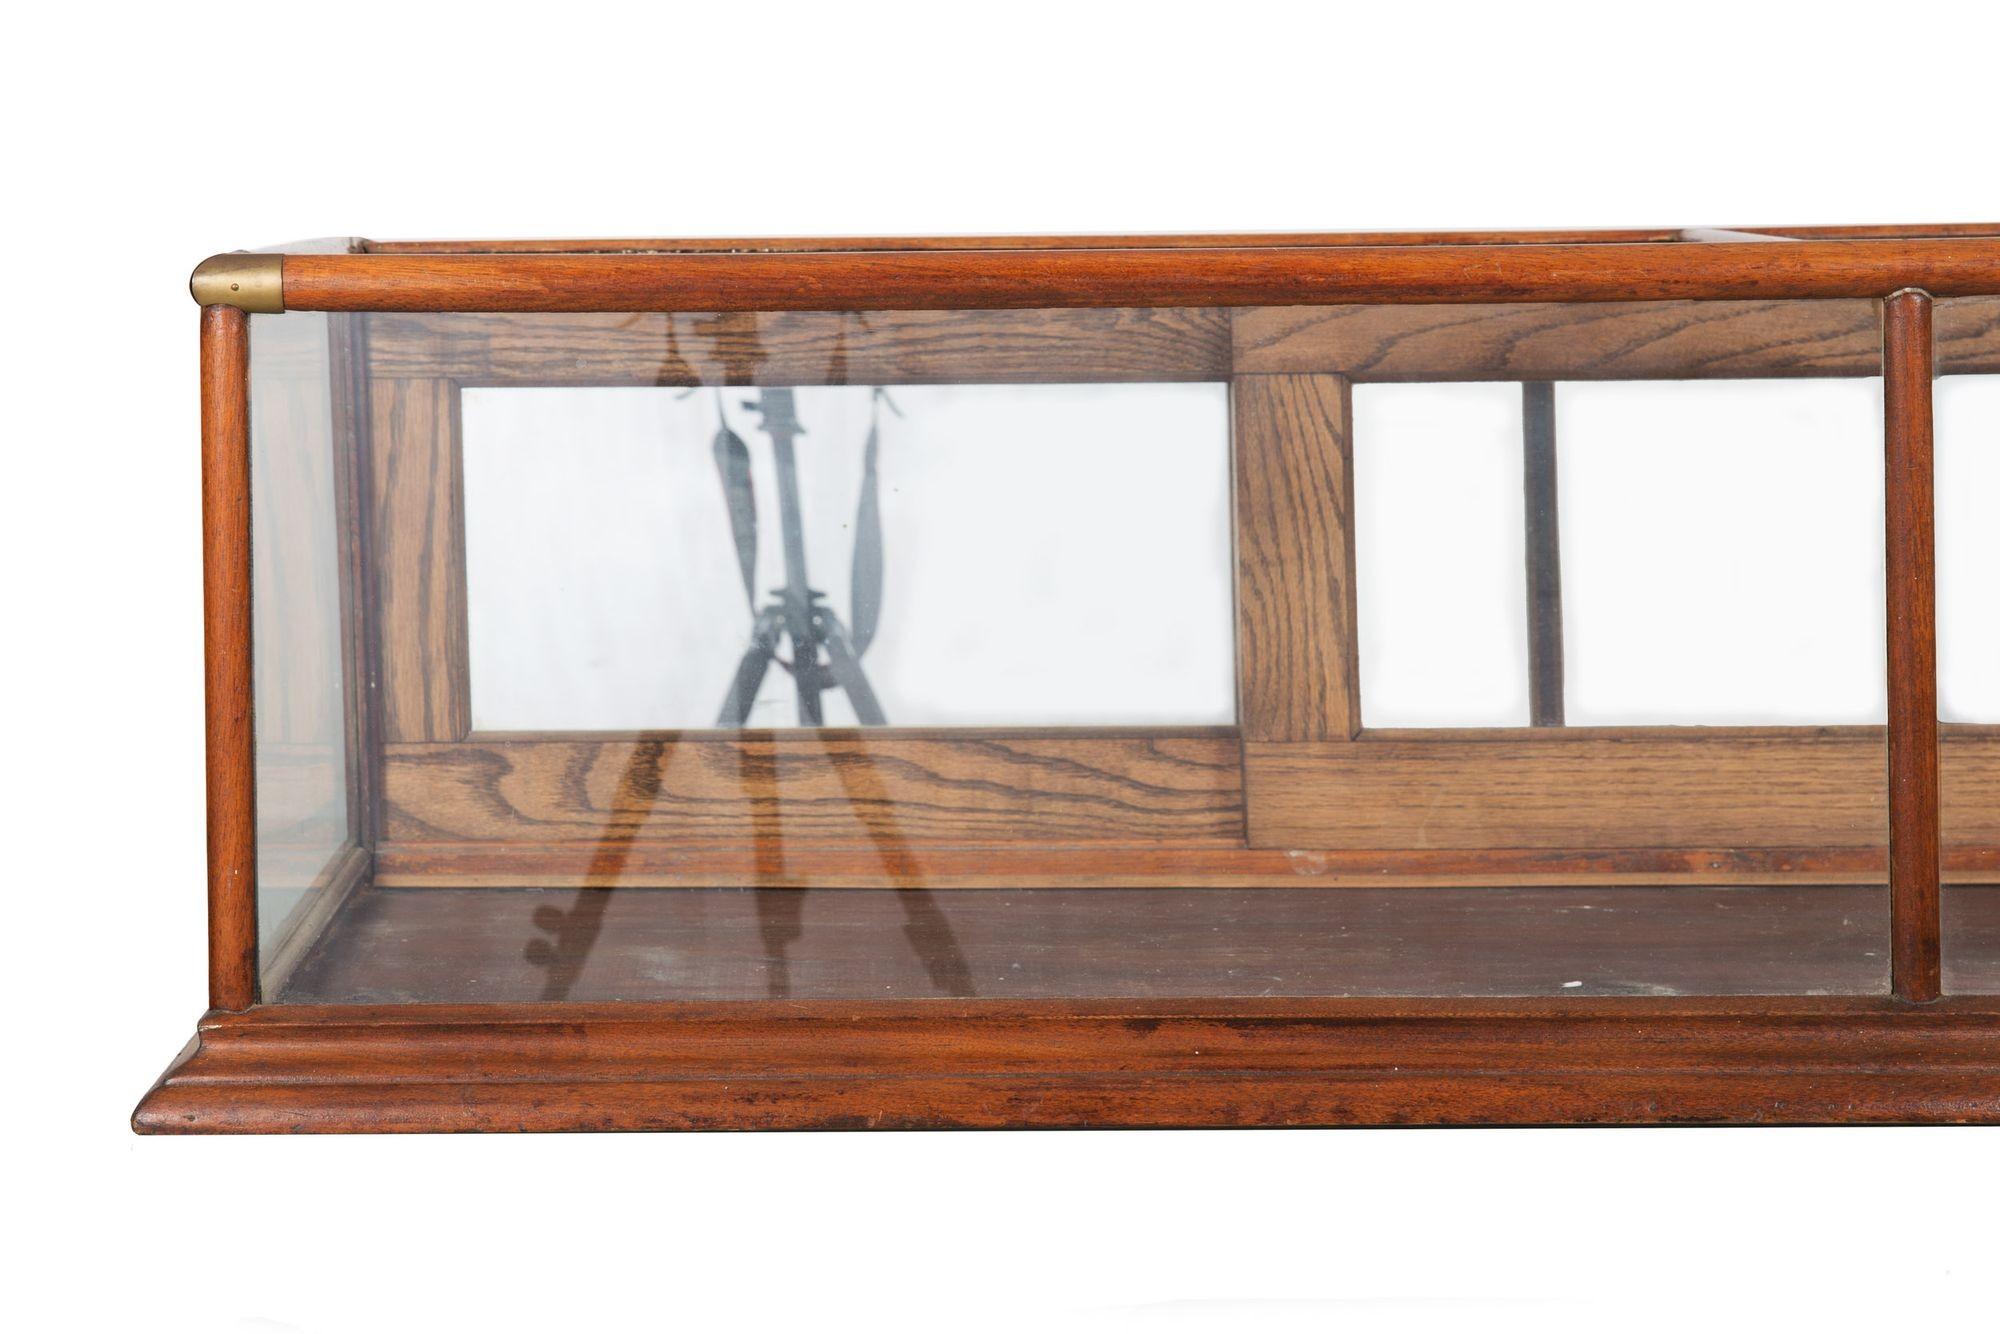 20th Century Vintage Oak, Brass and Glass Countertop Display Cabinet Case by Richard Sauer